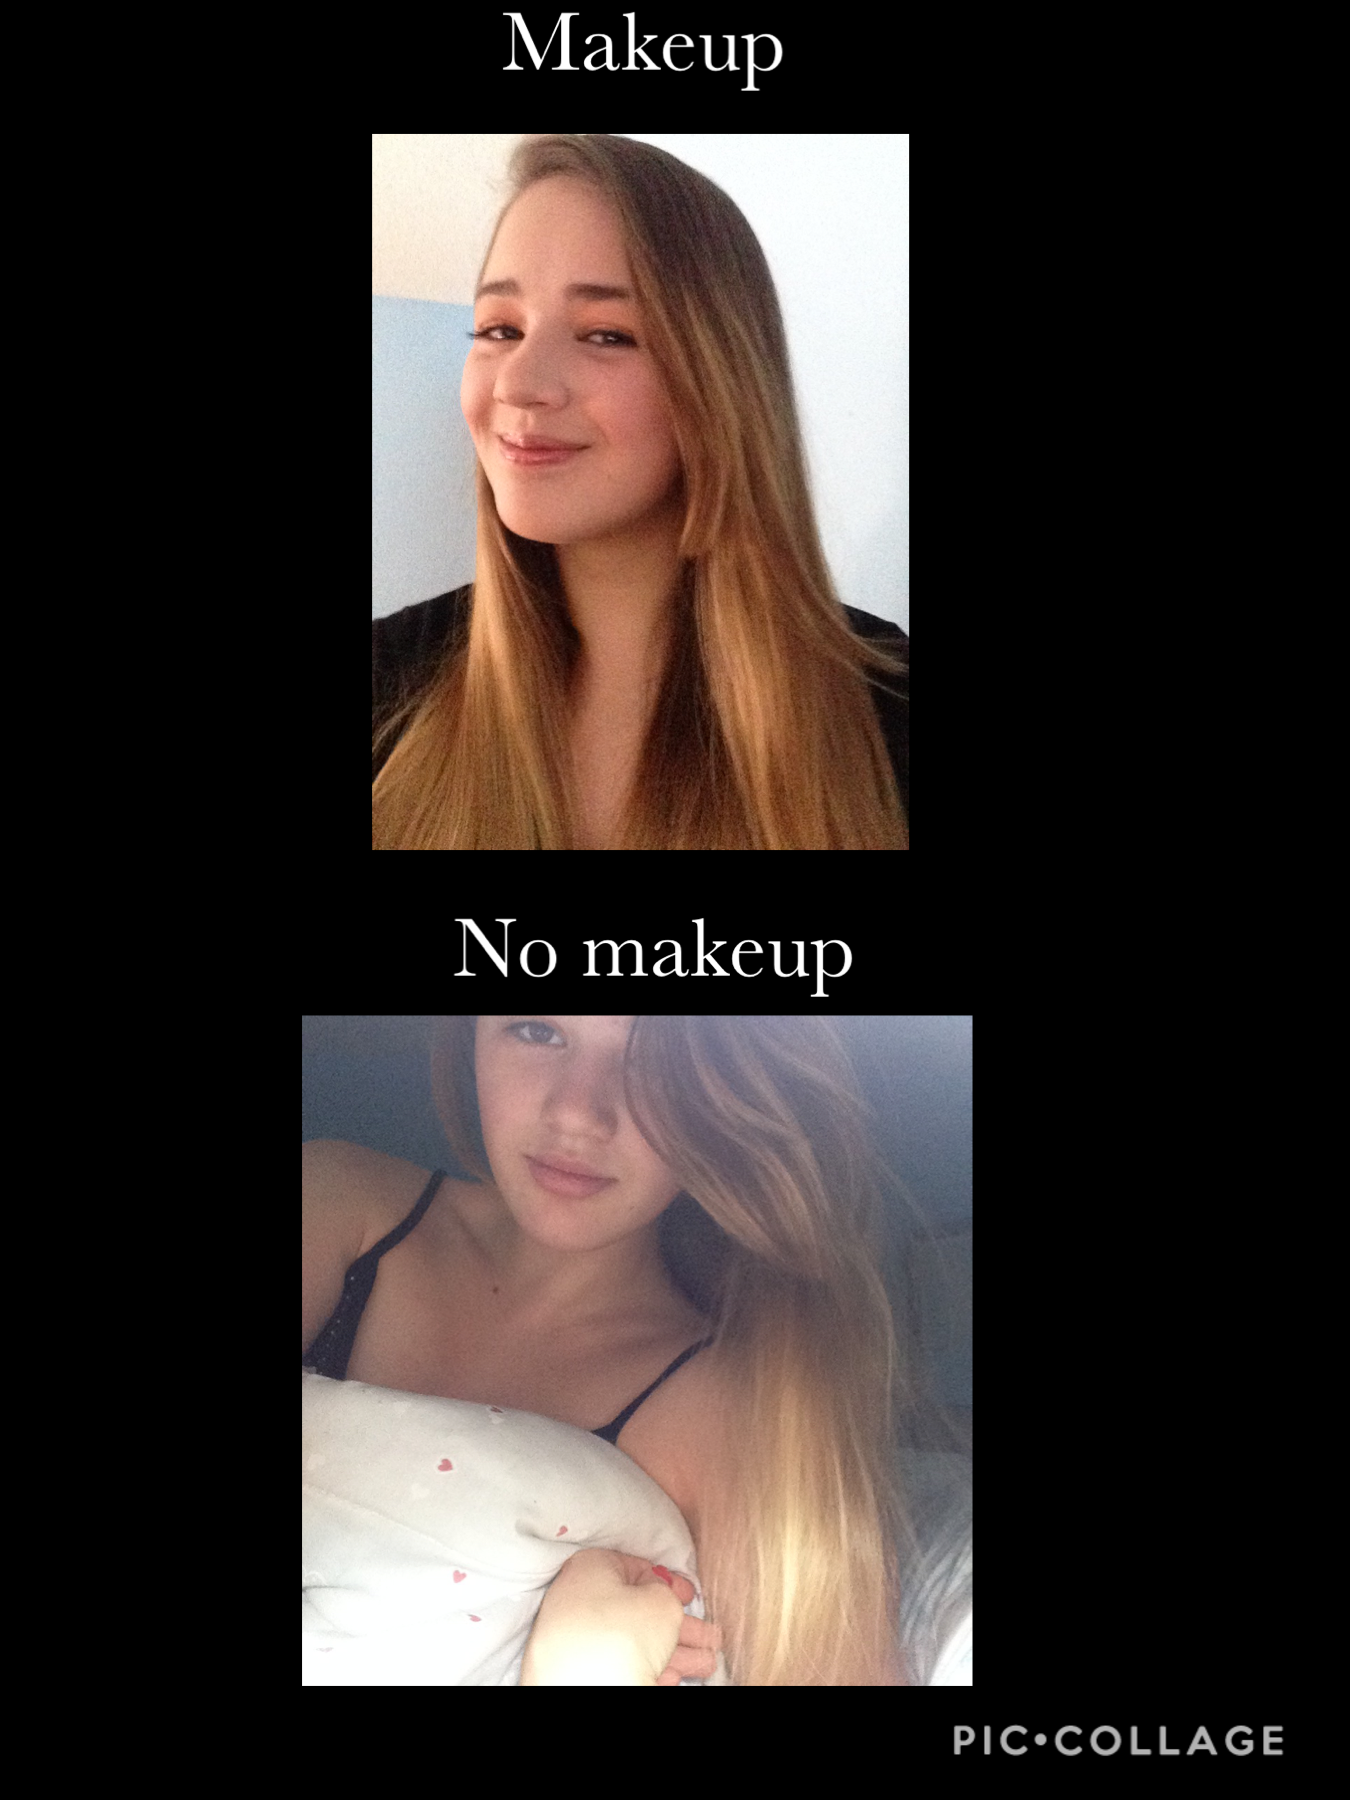 If your brave enough post a picture with you wearing makeup and the other with no makeup😜